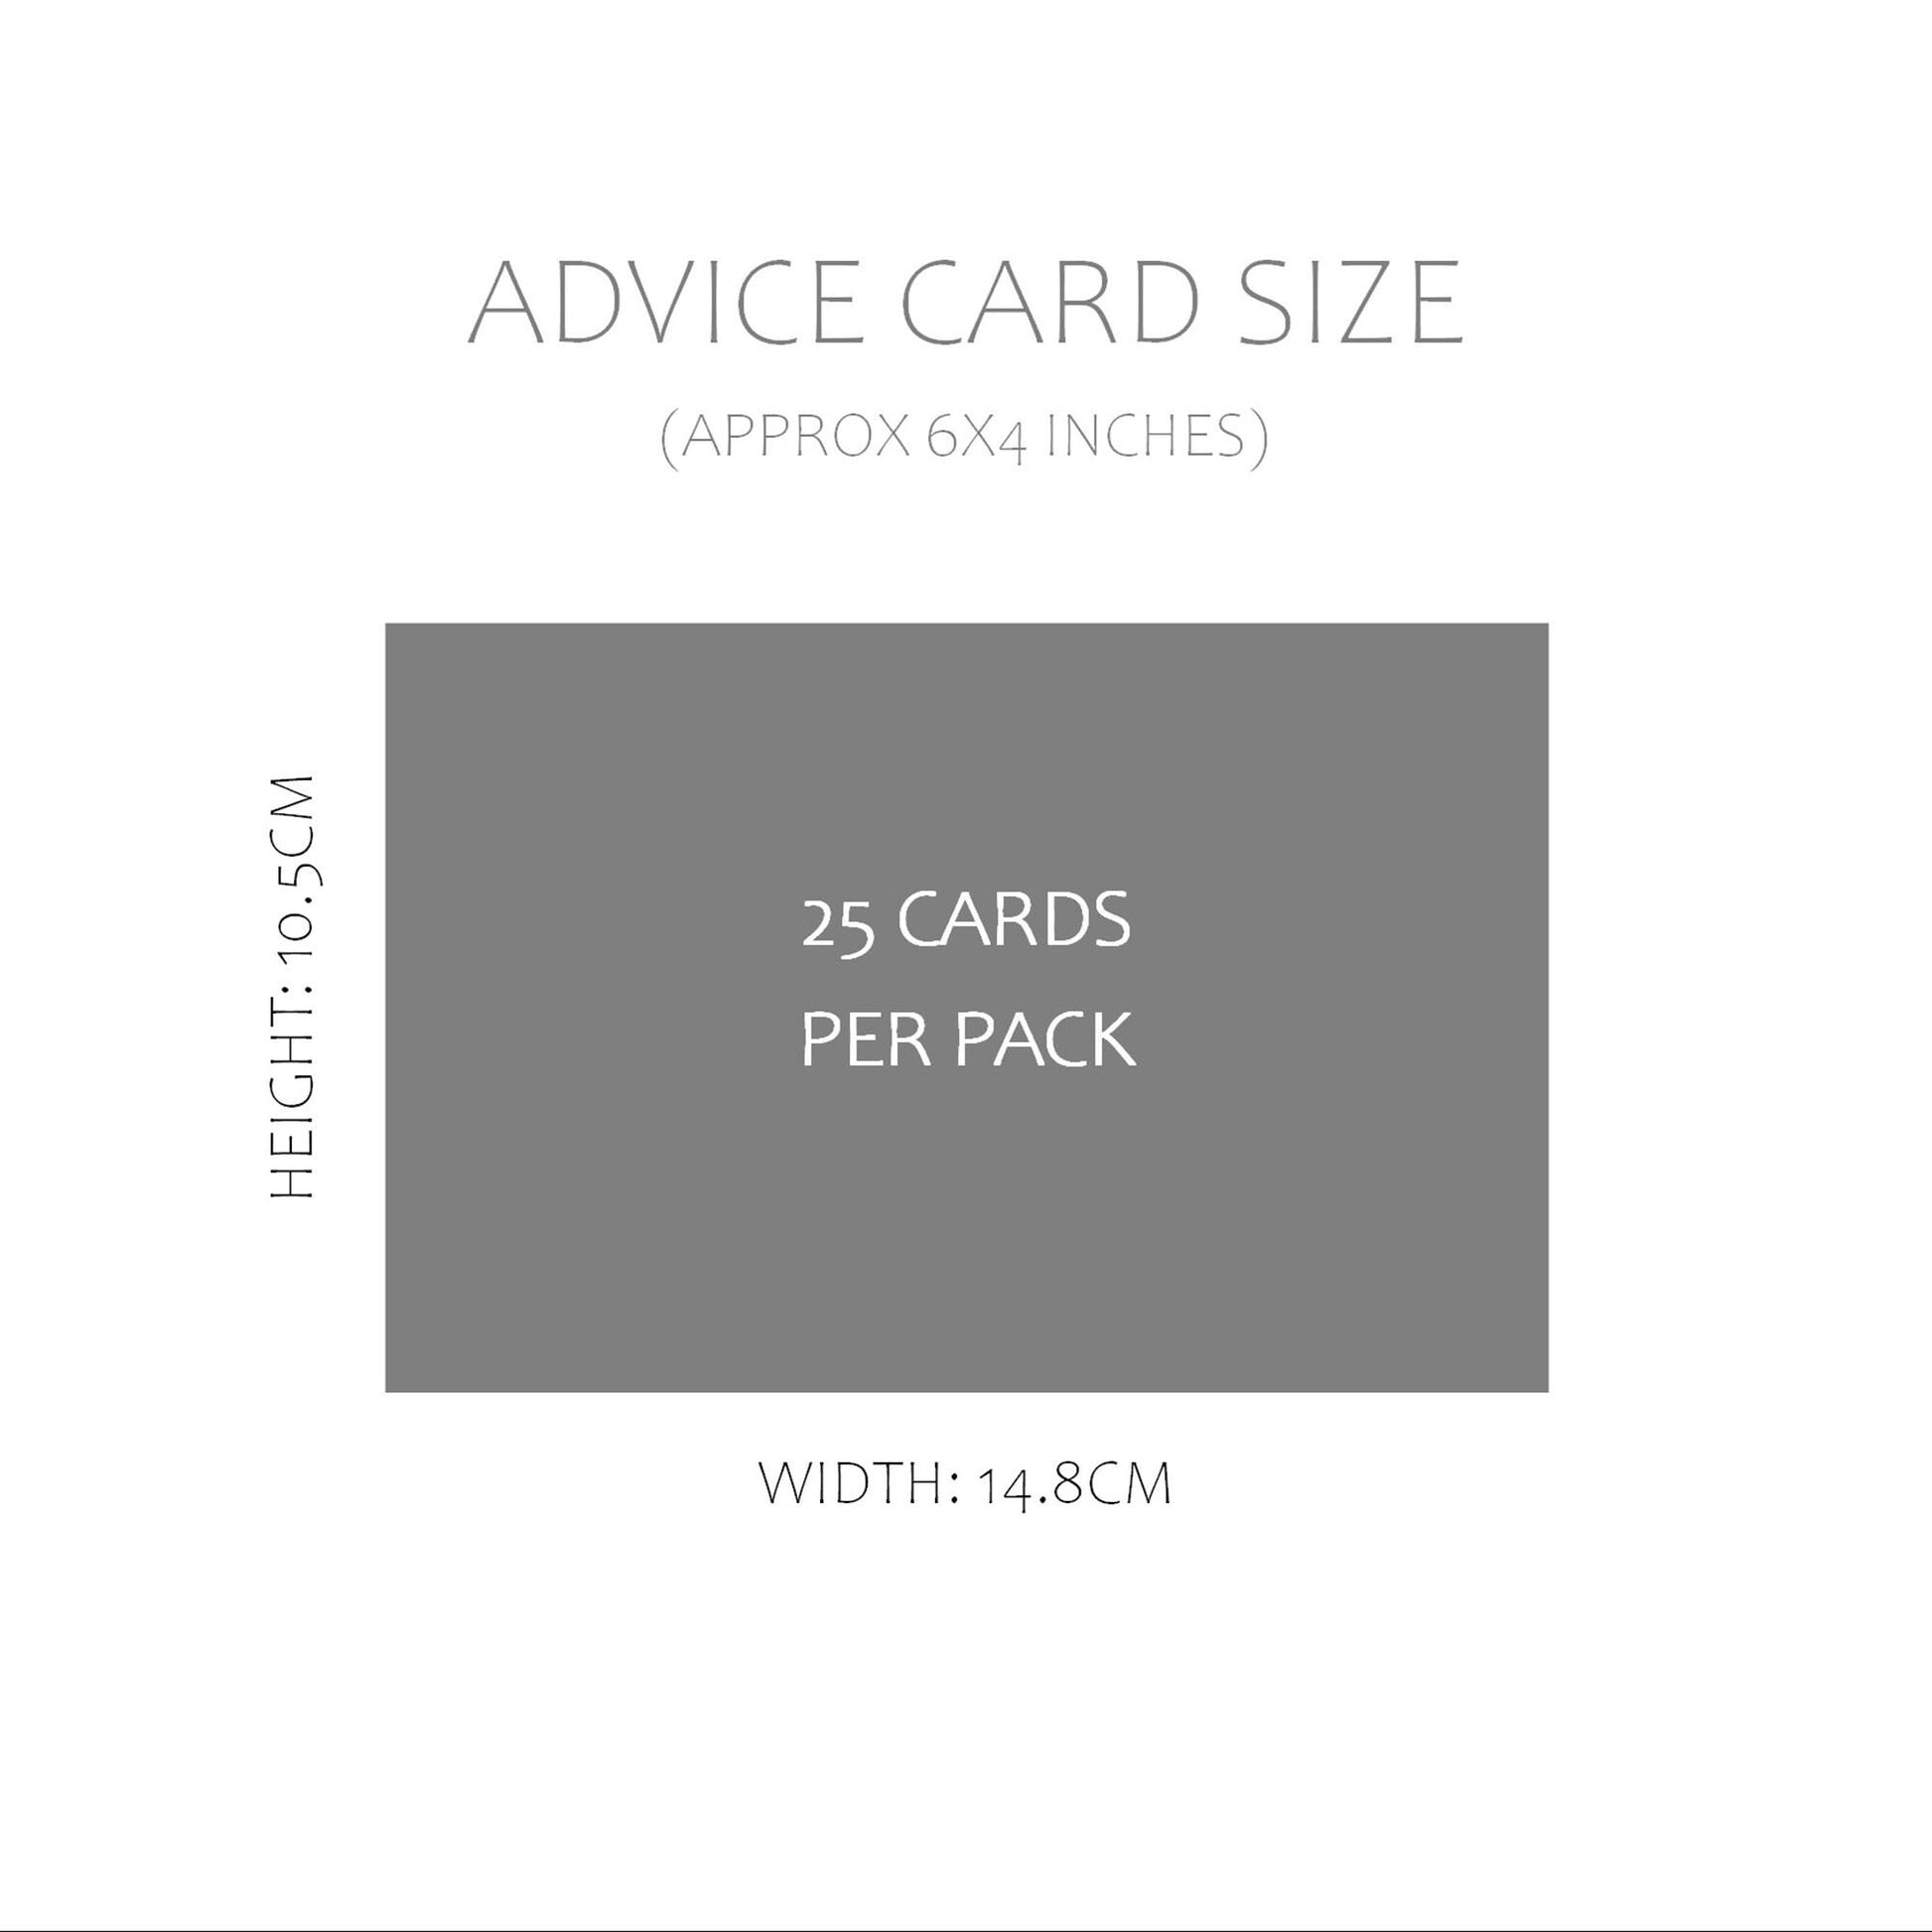 Greenery Wedding Advice Cards - Pack Of 25